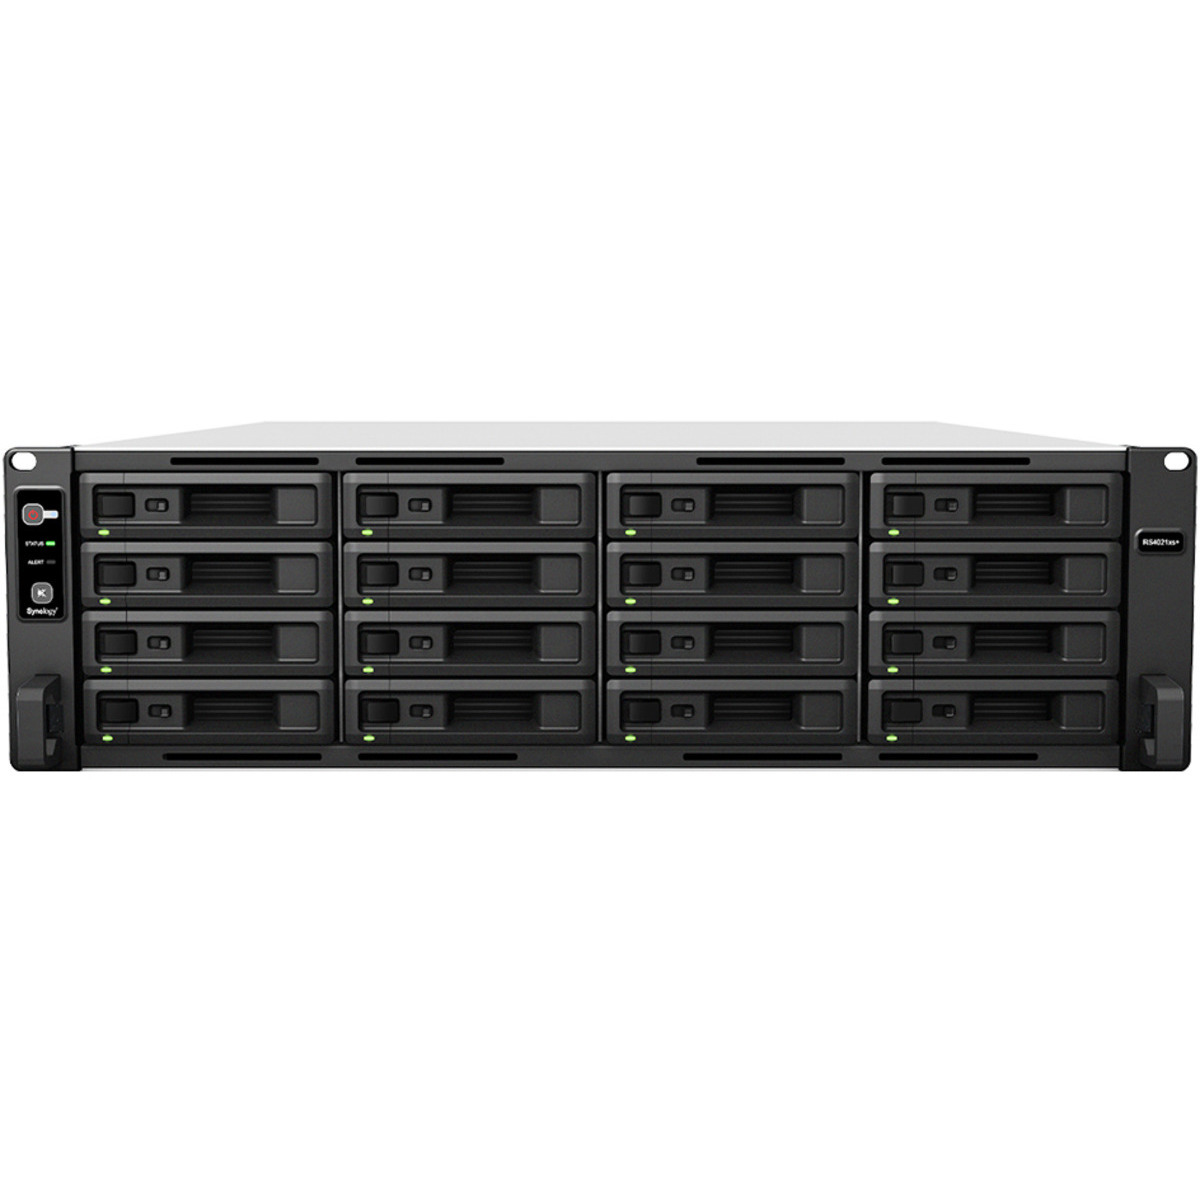 Synology RackStation RS4021xs+ 210tb 16-Bay RackMount Large Business / Enterprise NAS - Network Attached Storage Device 15x14tb Toshiba Enterprise Capacity MG07ACA14TE 3.5 7200rpm SATA 6Gb/s HDD ENTERPRISE Class Drives Installed - Burn-In Tested RackStation RS4021xs+